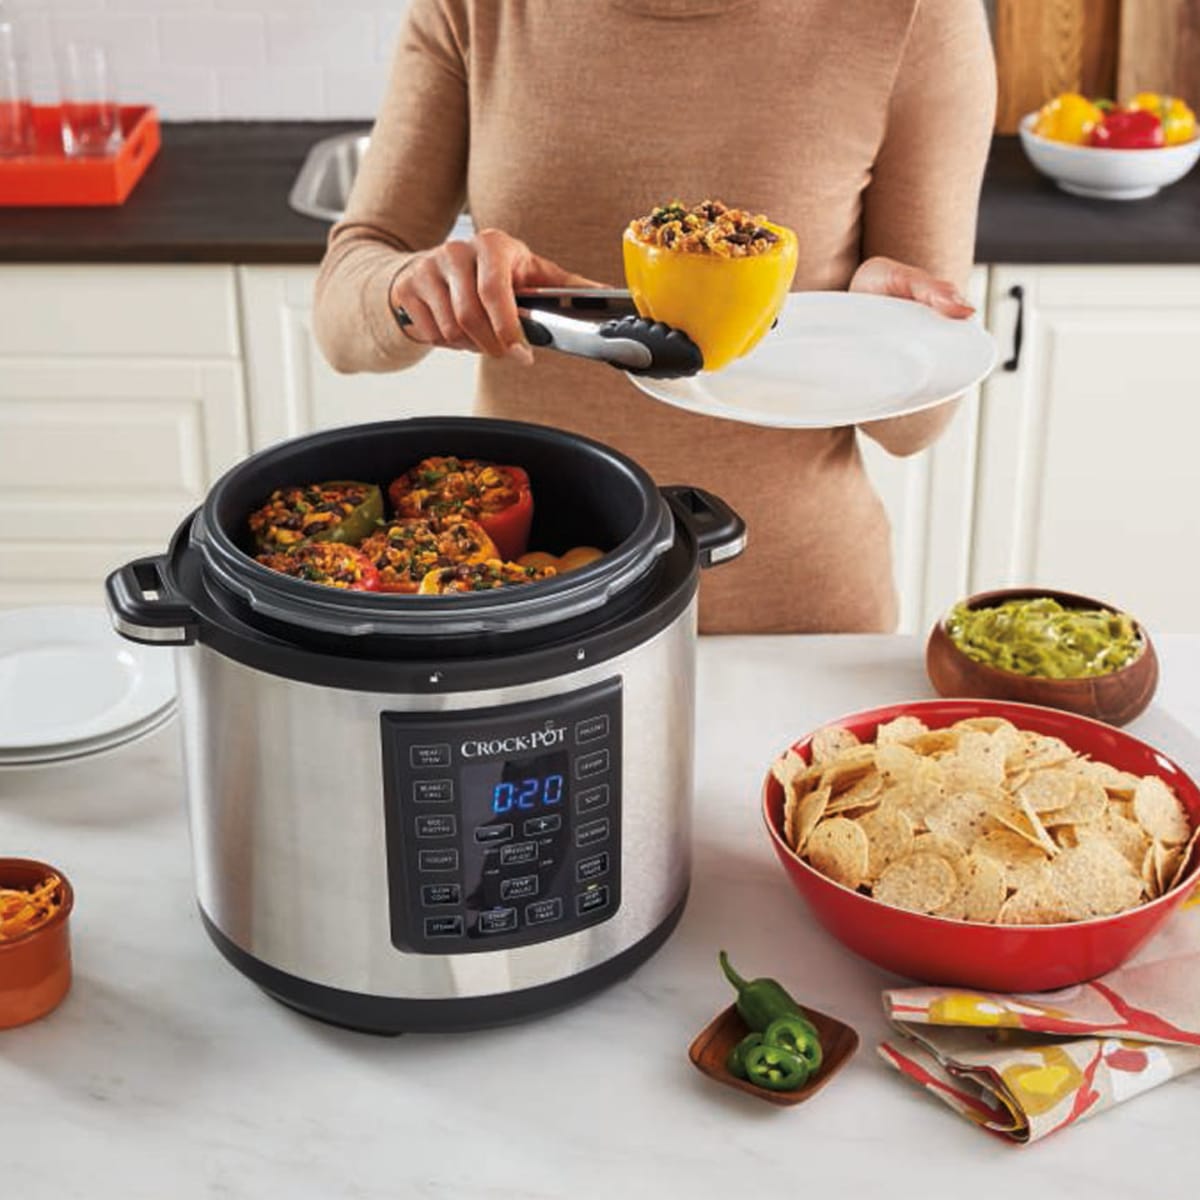 5 Delicious—and Surprisingly Quick-to-Make—Crock-Pot Express Crock Multi- Cooker Recipes - Men's Journal